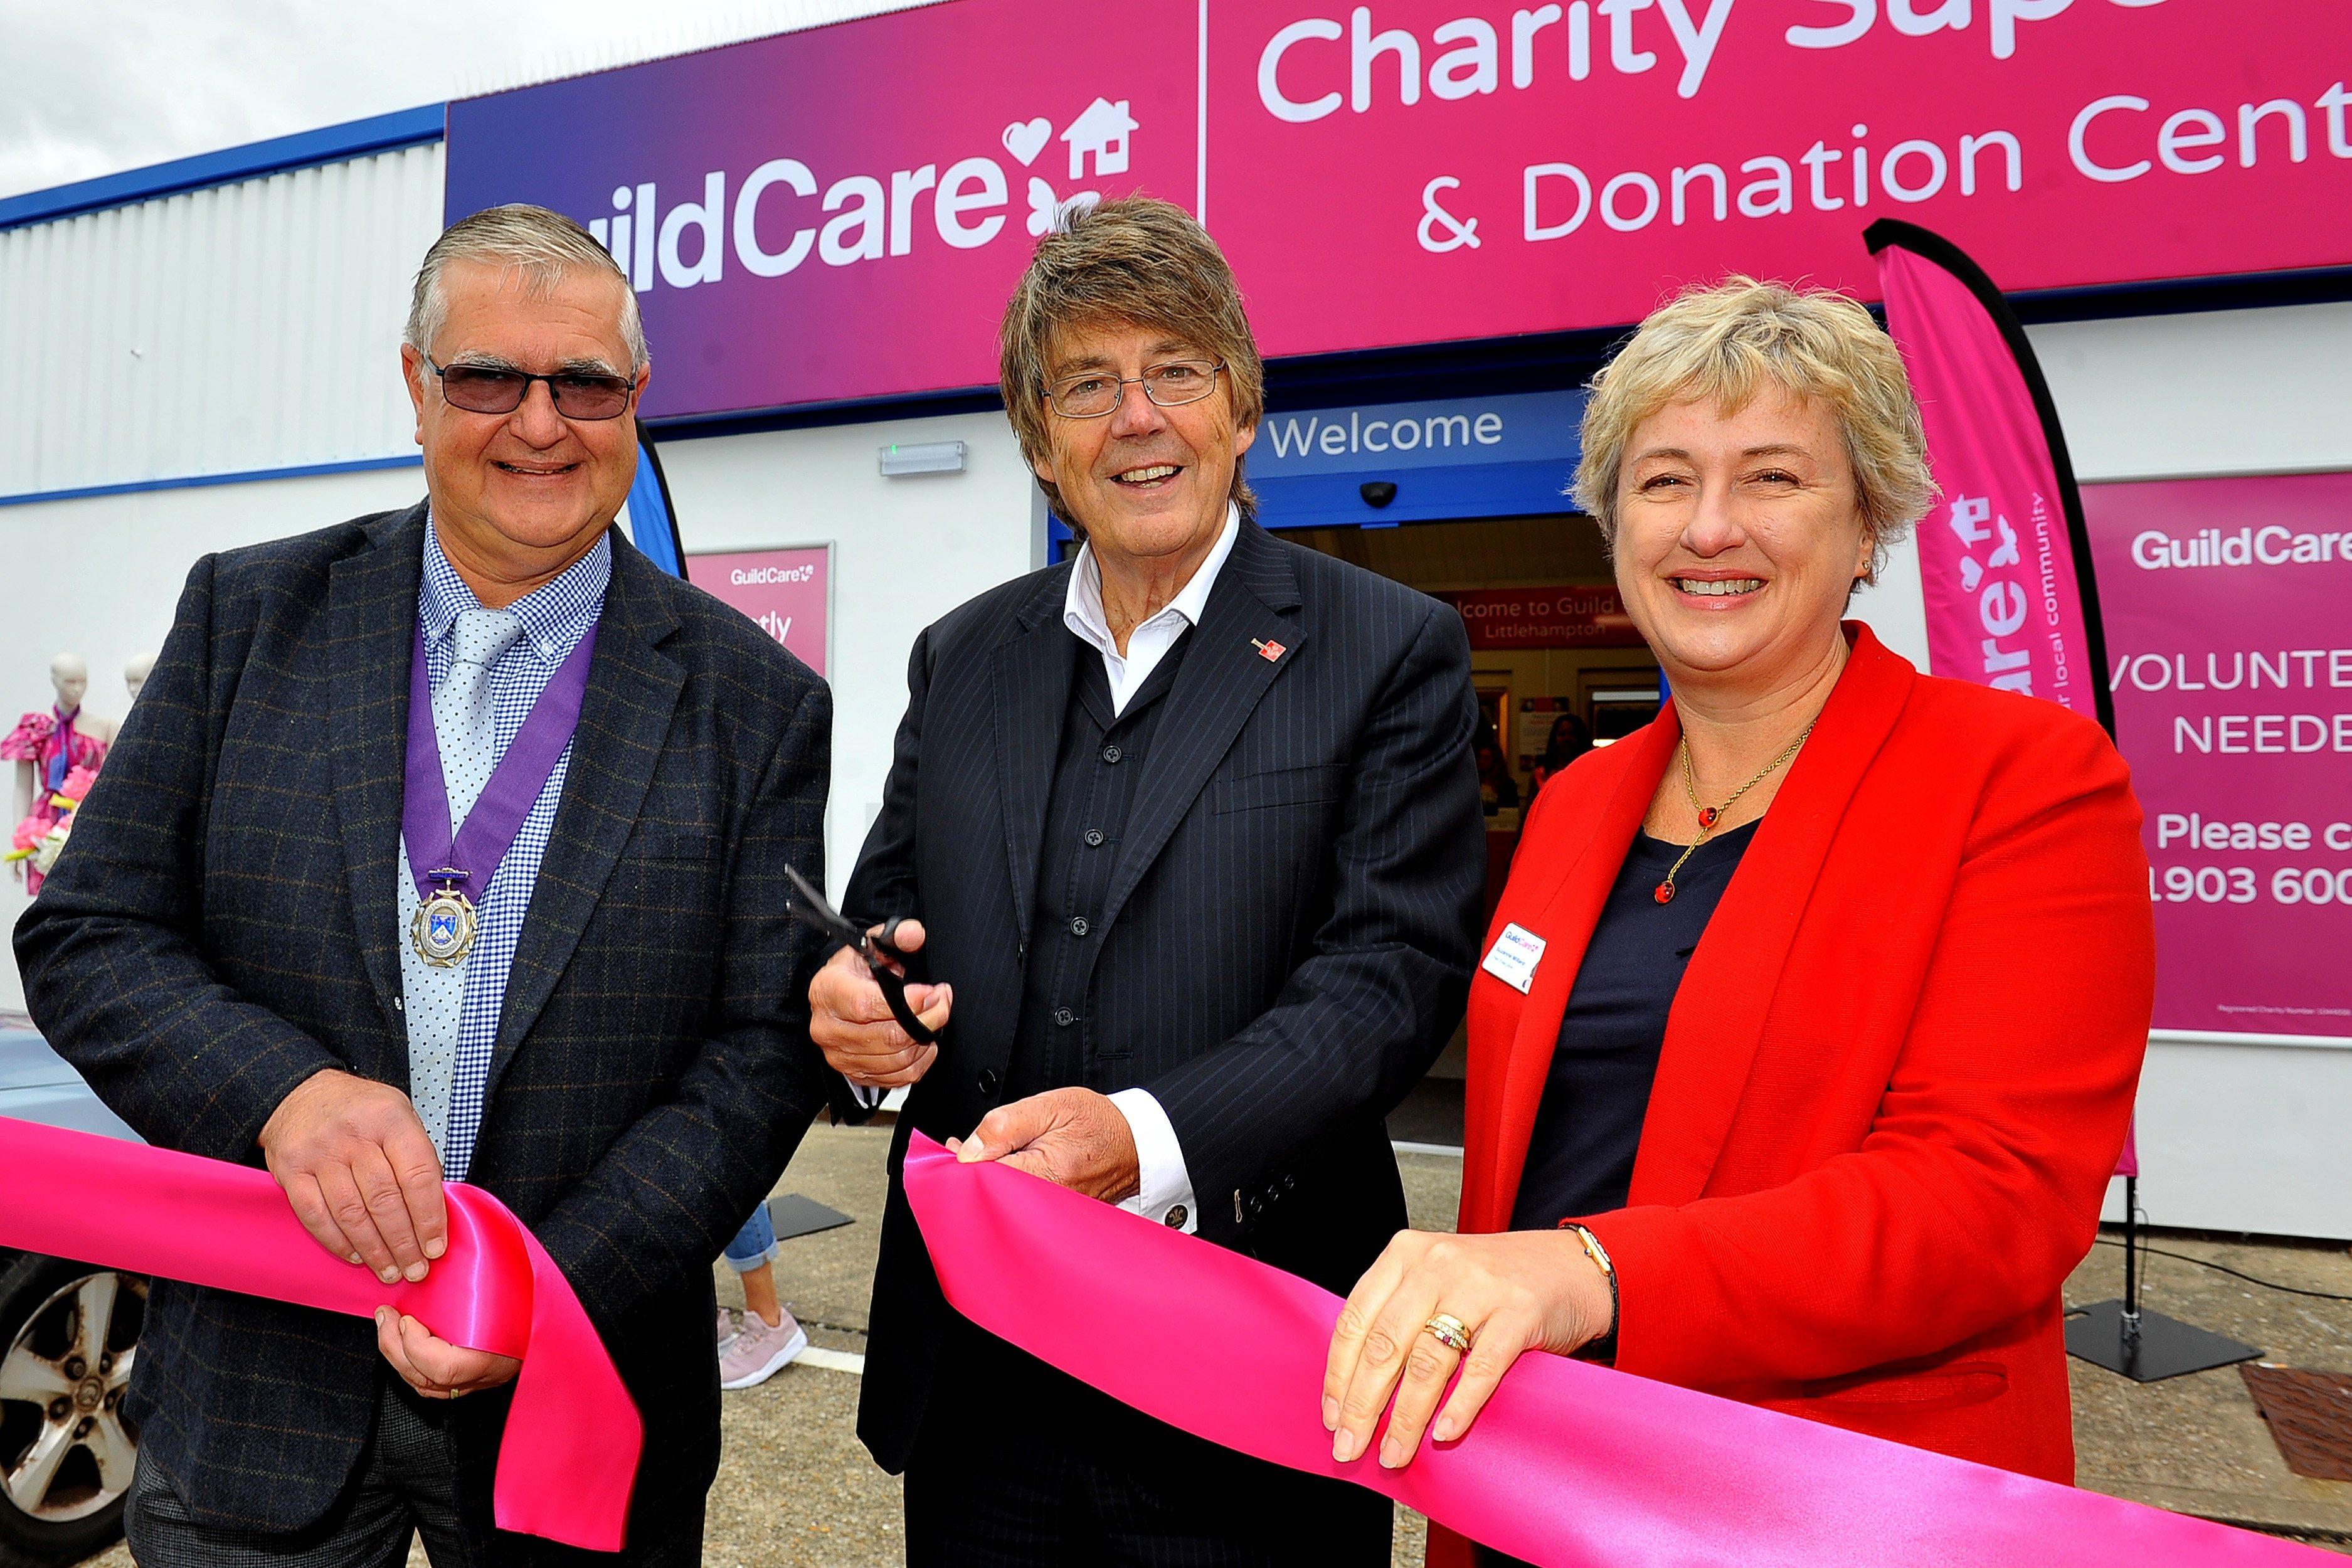 TV and radio presenter Mike Read cuts the ribbon to open the new Guild Care superstore and donation centre in Littlehampton, with chief executive Suzanne Millard and deputy mayor David Chace. Picture: Steve Robards SR03101901